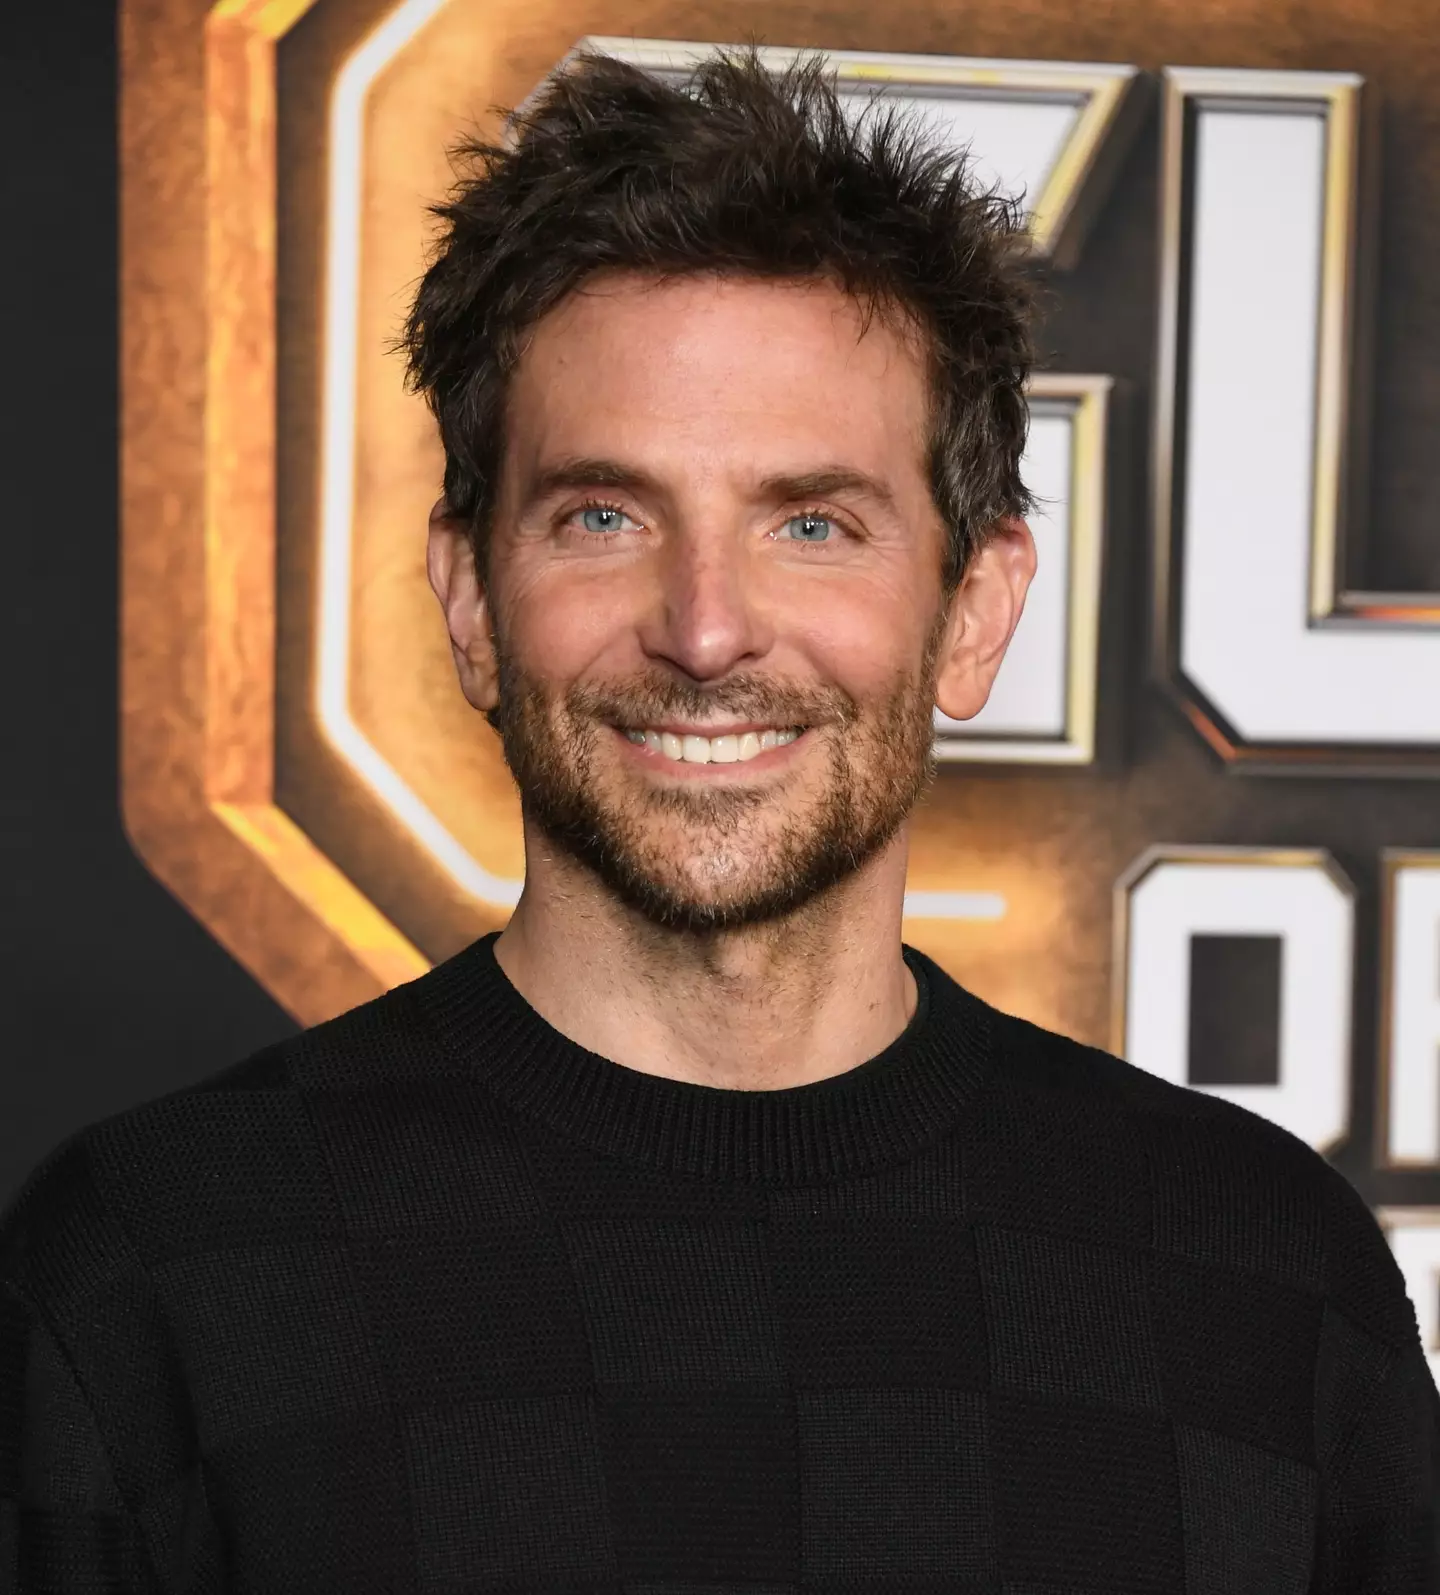 Bradley Cooper has opened up about his previous substance abuse issues.